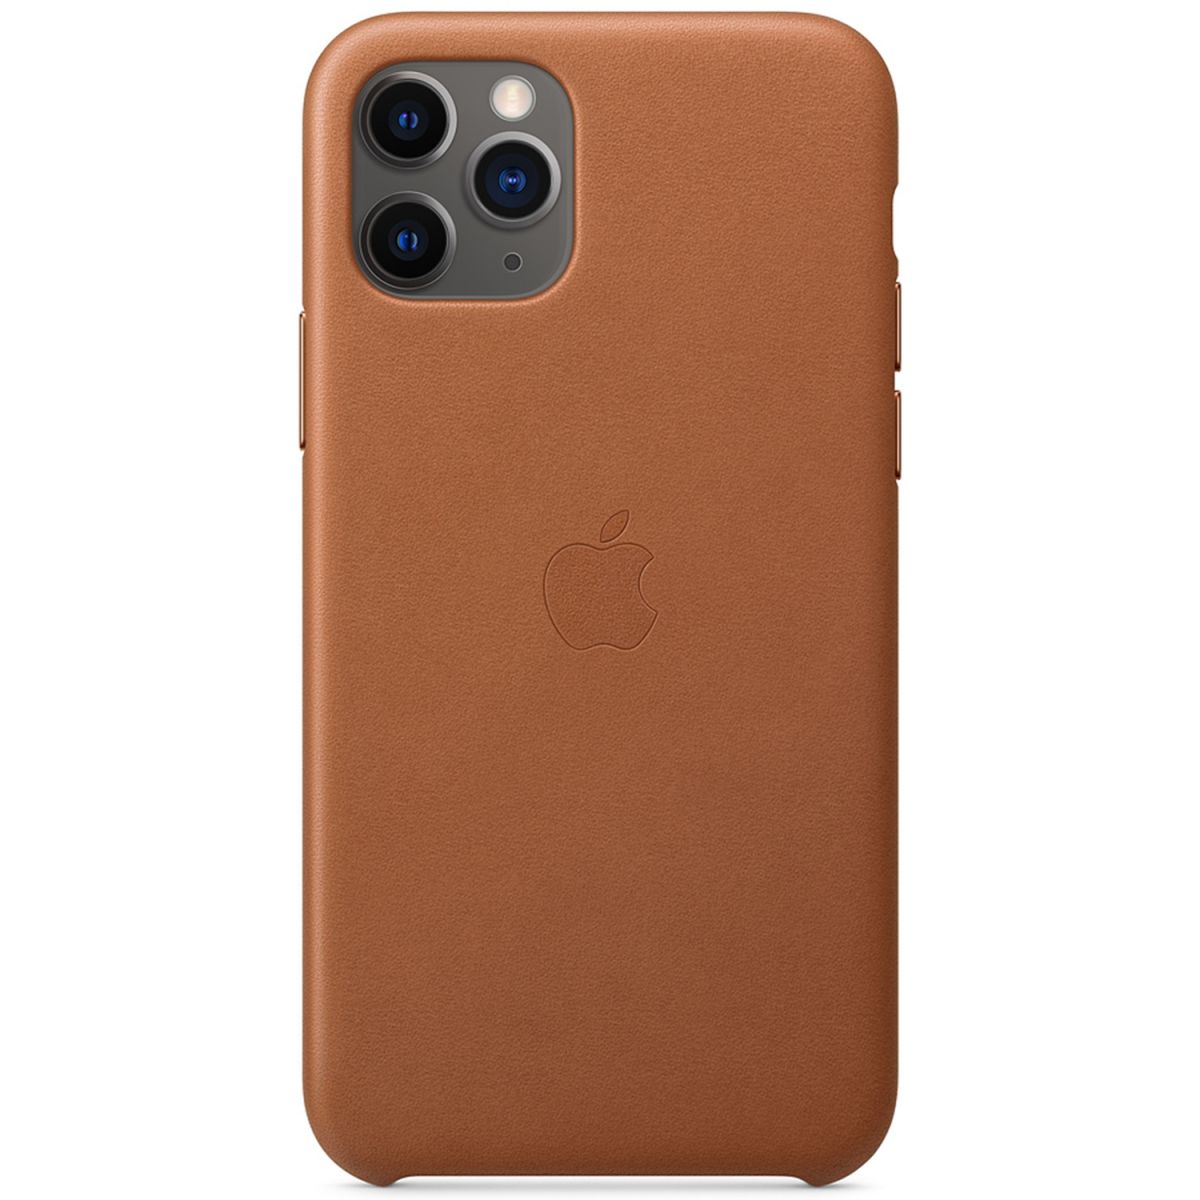 Apple Leather Backcover for iPhone 11 Pro  - Saddle Brown